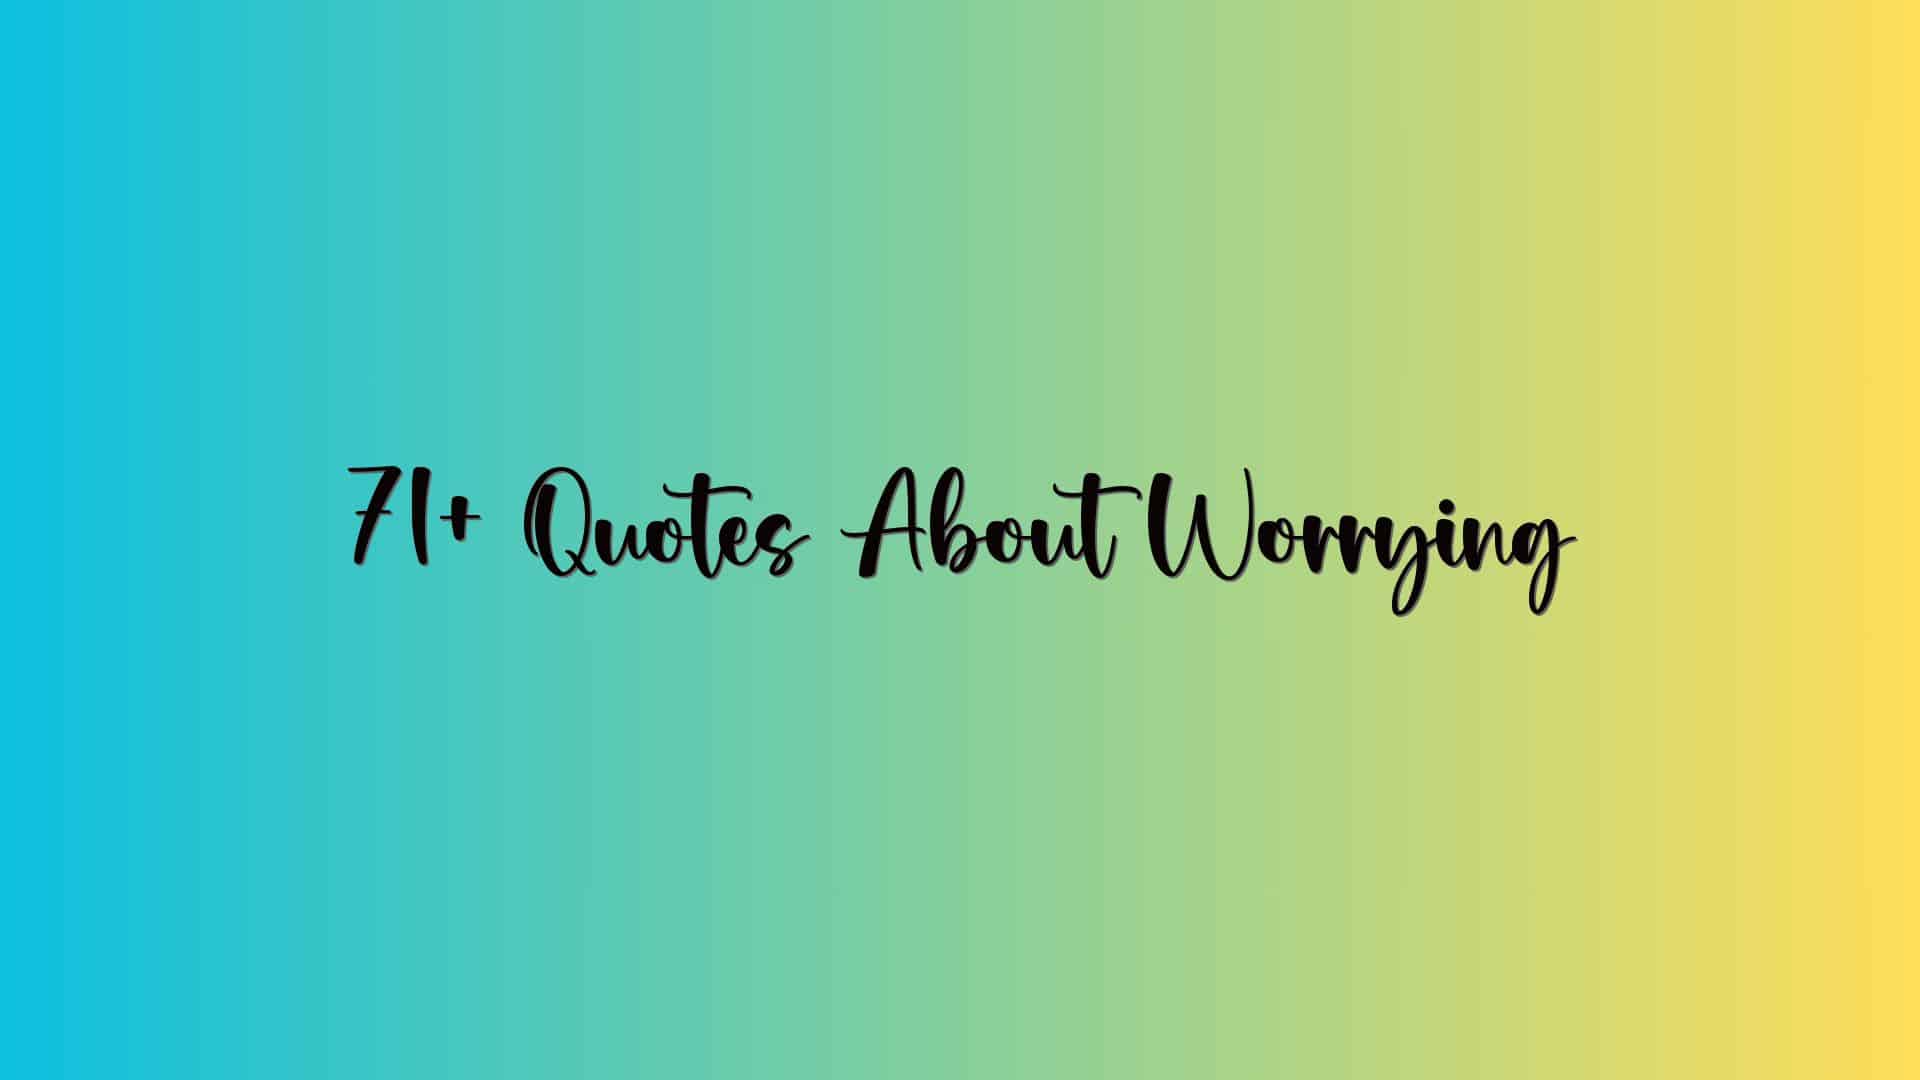 71+ Quotes About Worrying